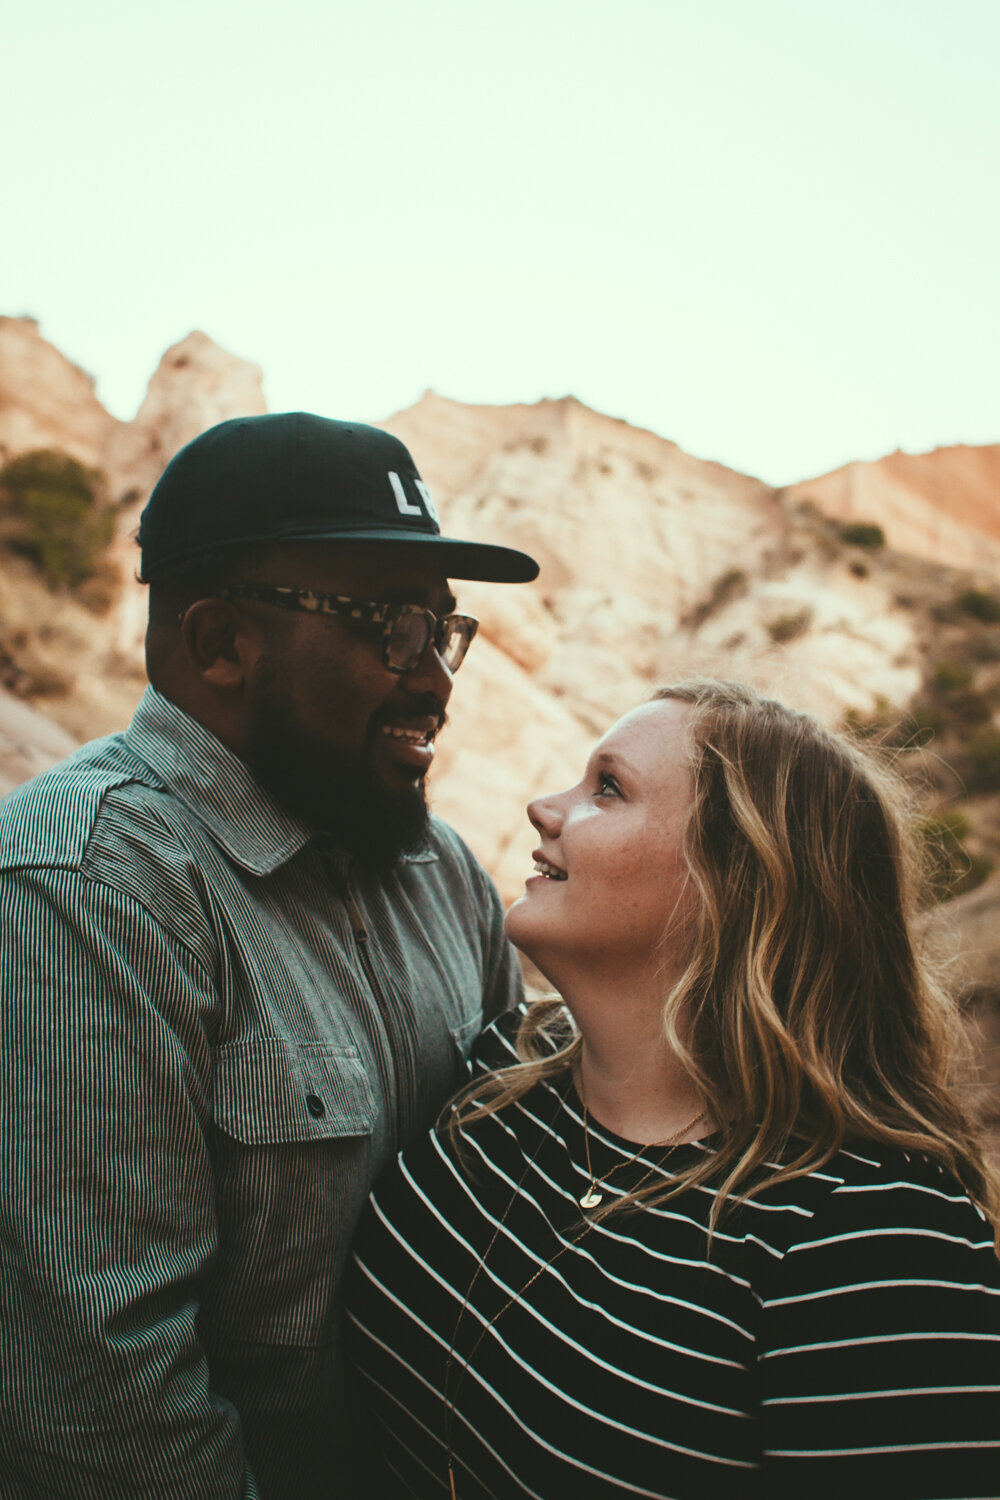 engagement engaged photography photographe marriage wedding photographer corse corsica california desert foothill ranch whiting lifestyle Anza Creative-23.jpg